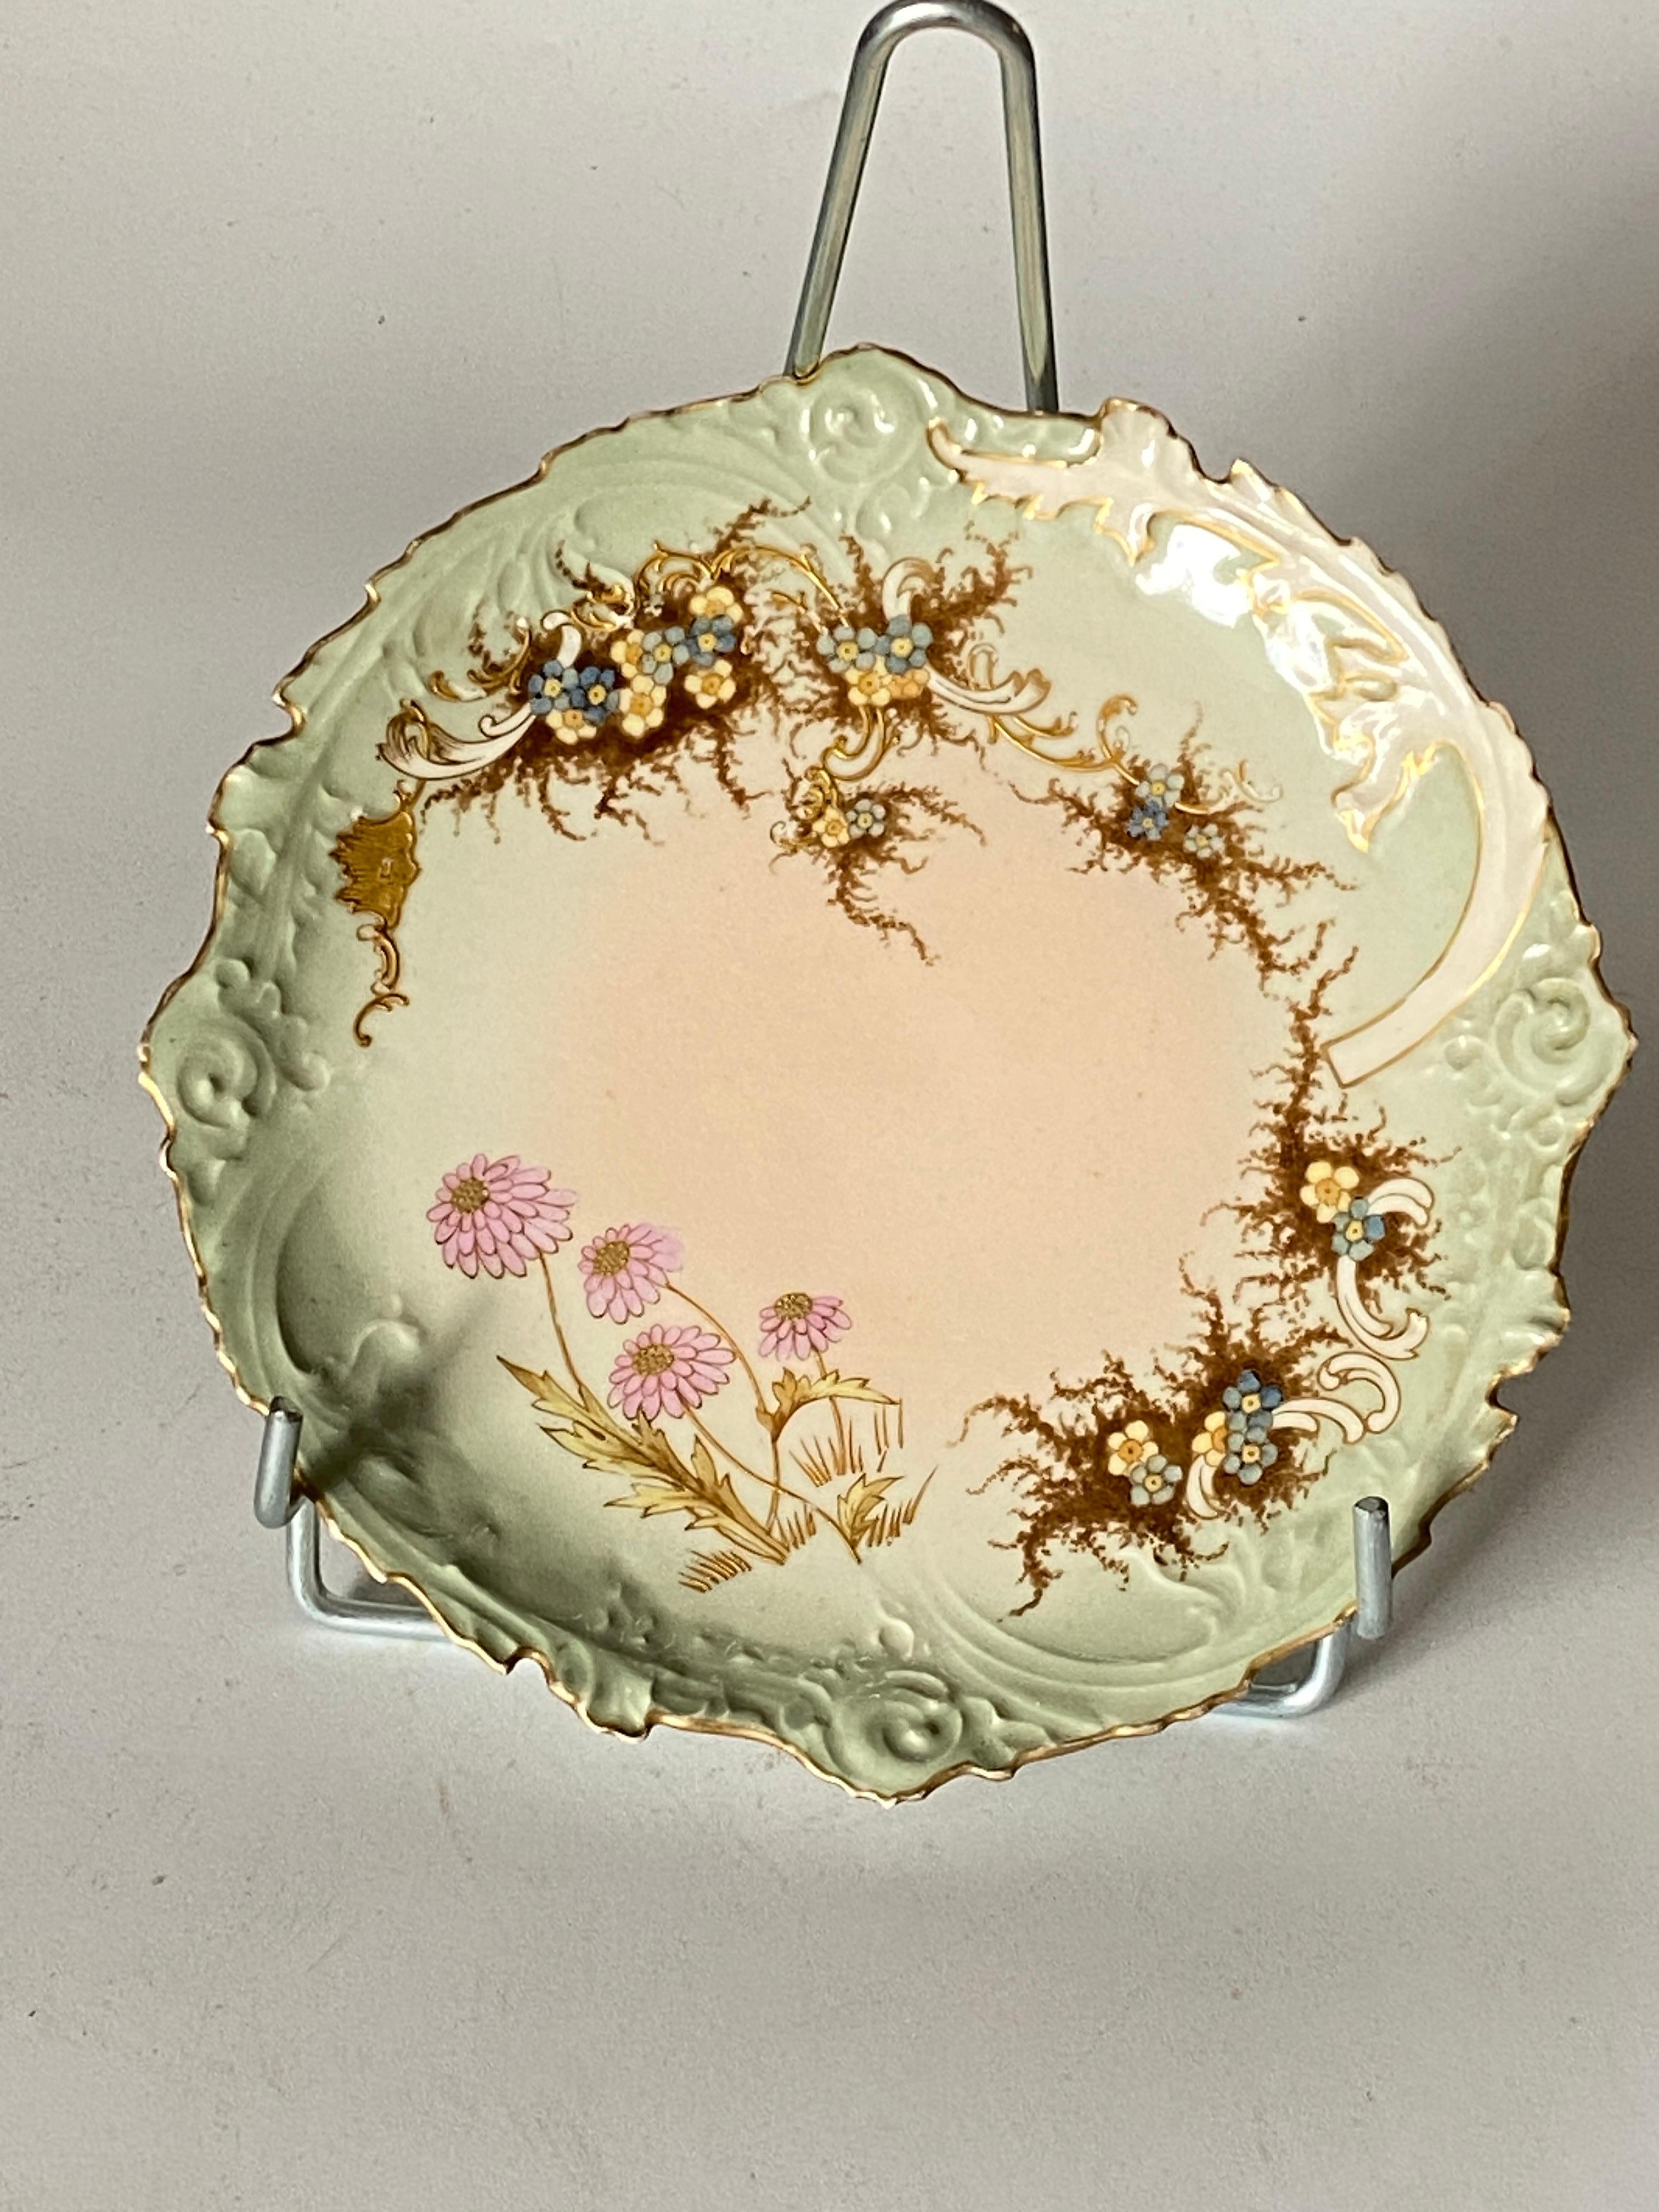 This plate demonstrates the attractiveness of French ceramists from the second half of the 19th century aesthetics and Far Eastern culture. Fascinated by its colors, shapes, artists redouble their ingenuity to give new aesthetic to their ceramics.